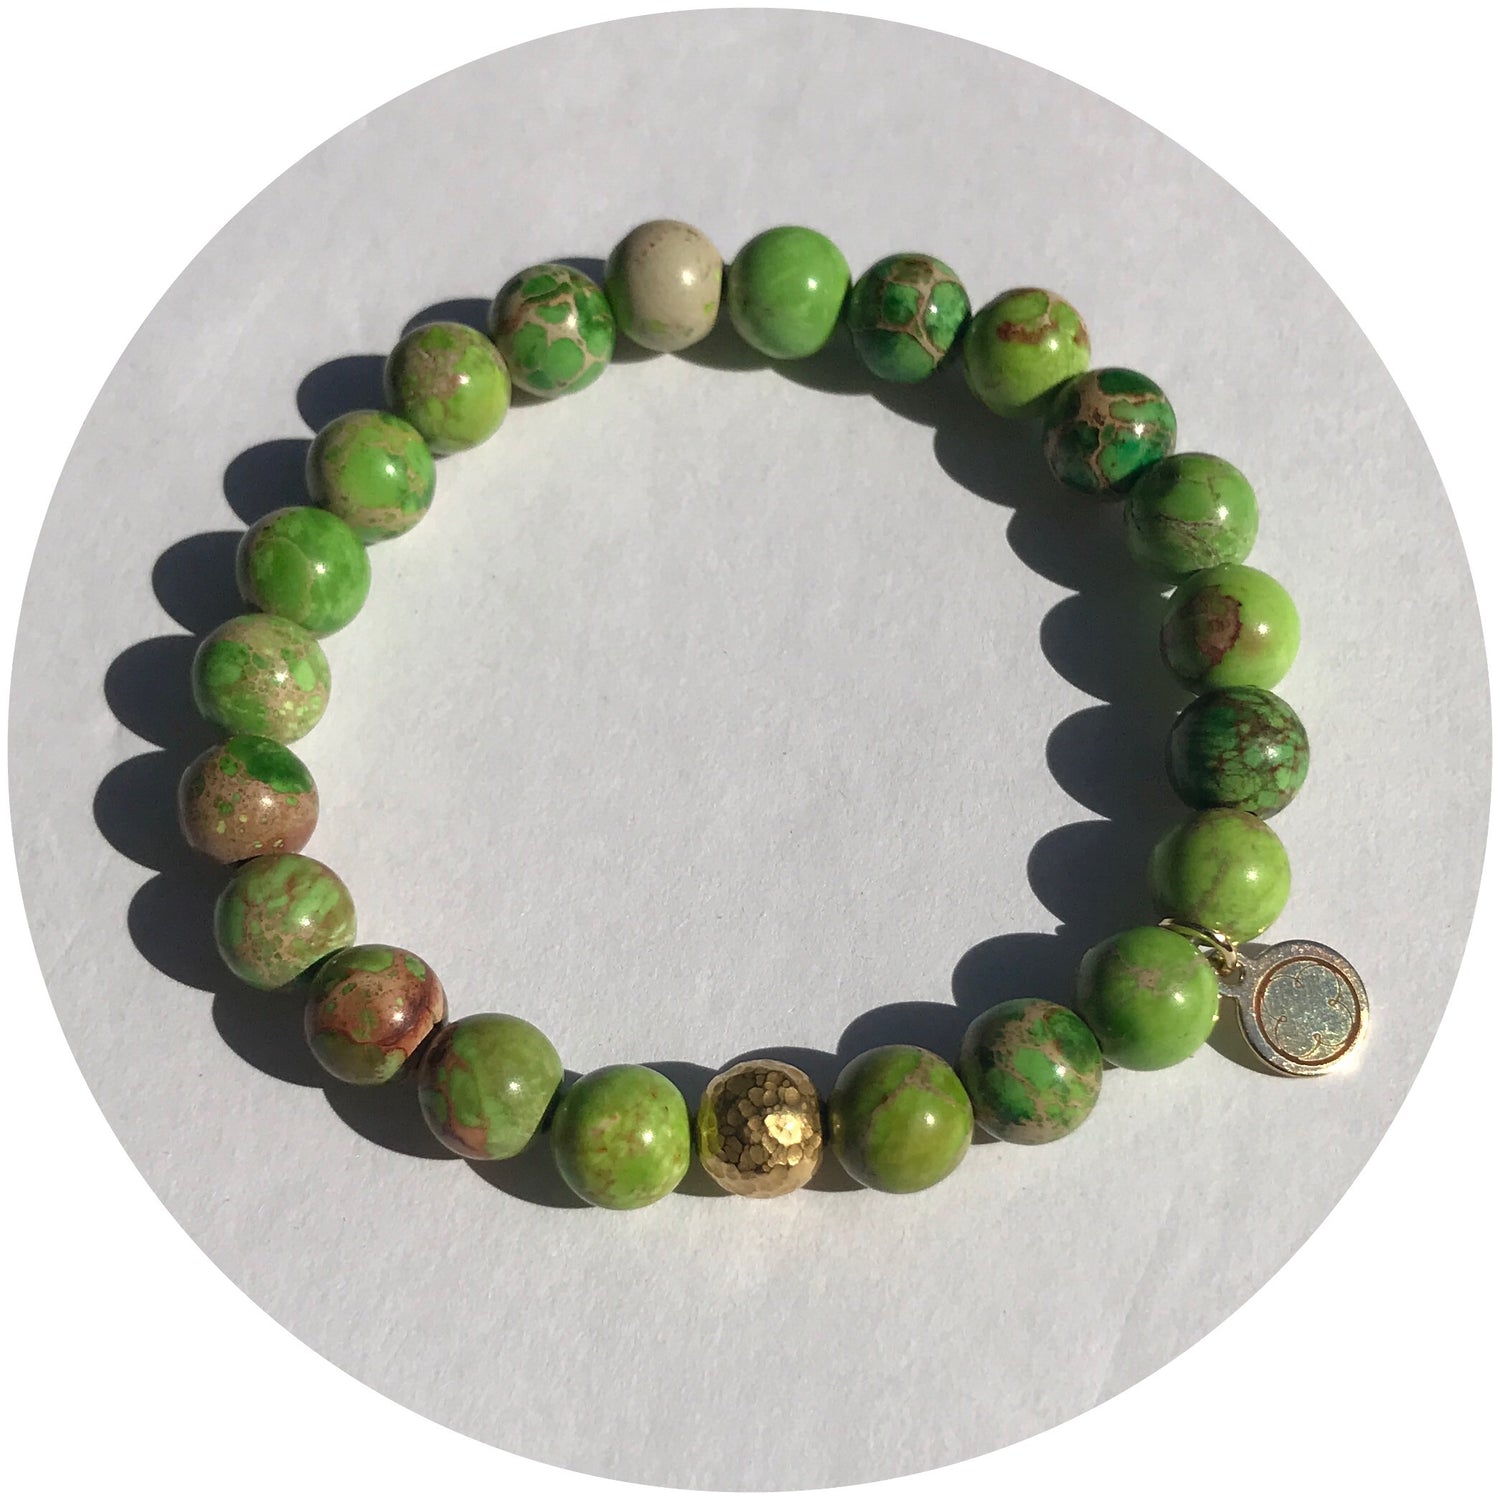 Green Imperial Jasper with Hammered Gold Accent - Oriana Lamarca LLC